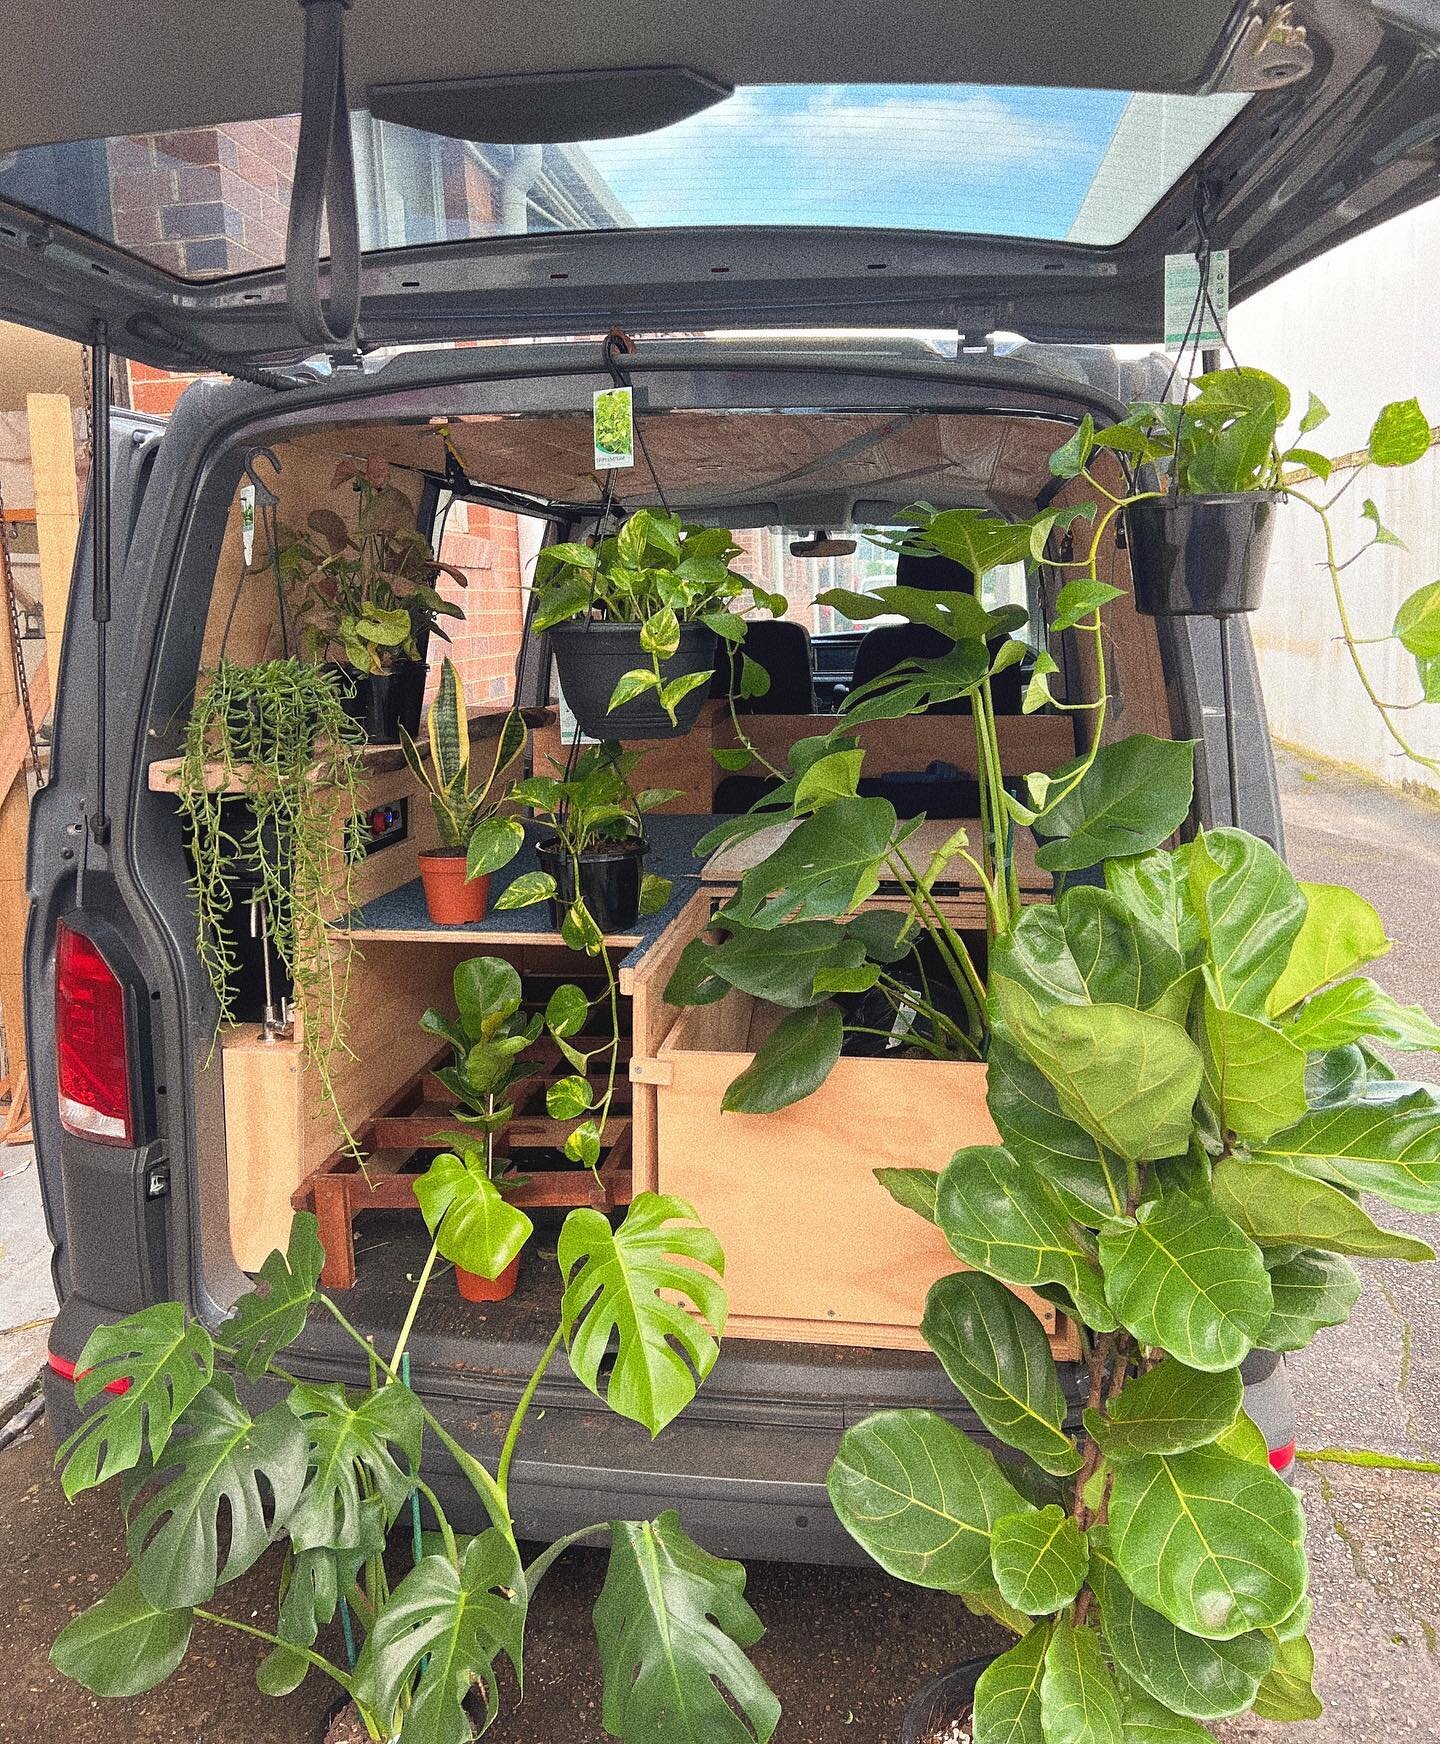 Back of the Grey Nurse stocked up on plants! Heaven in a van! I feel like this should always be the back of my car?!?!?
 
 
For all your plant needs email me at: Flowers@fikafloristry.com.au

🪴🍃🌱🪴🌿🍃🪴
 
#indoorplants #indoorjungle #interiordesi